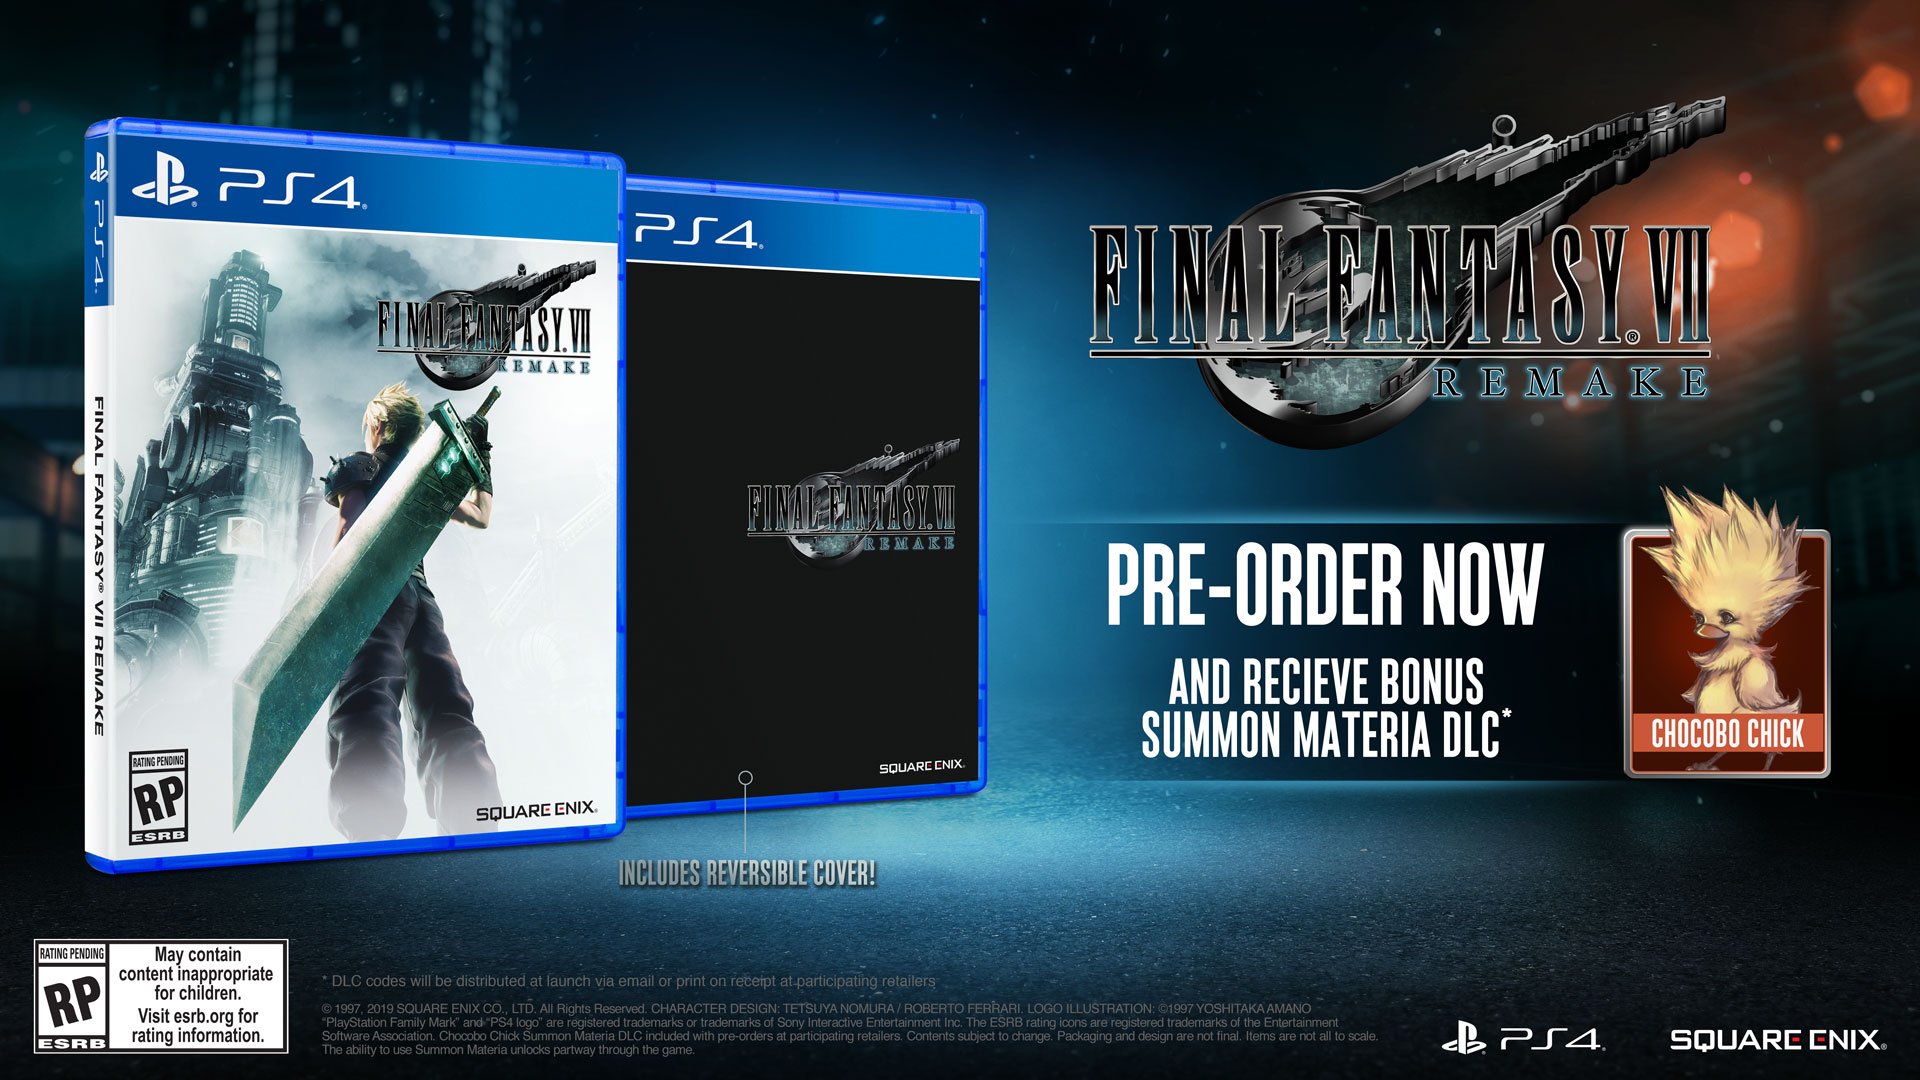 all physical copies of #FinalFantasy VII Remake will come with a reversible...